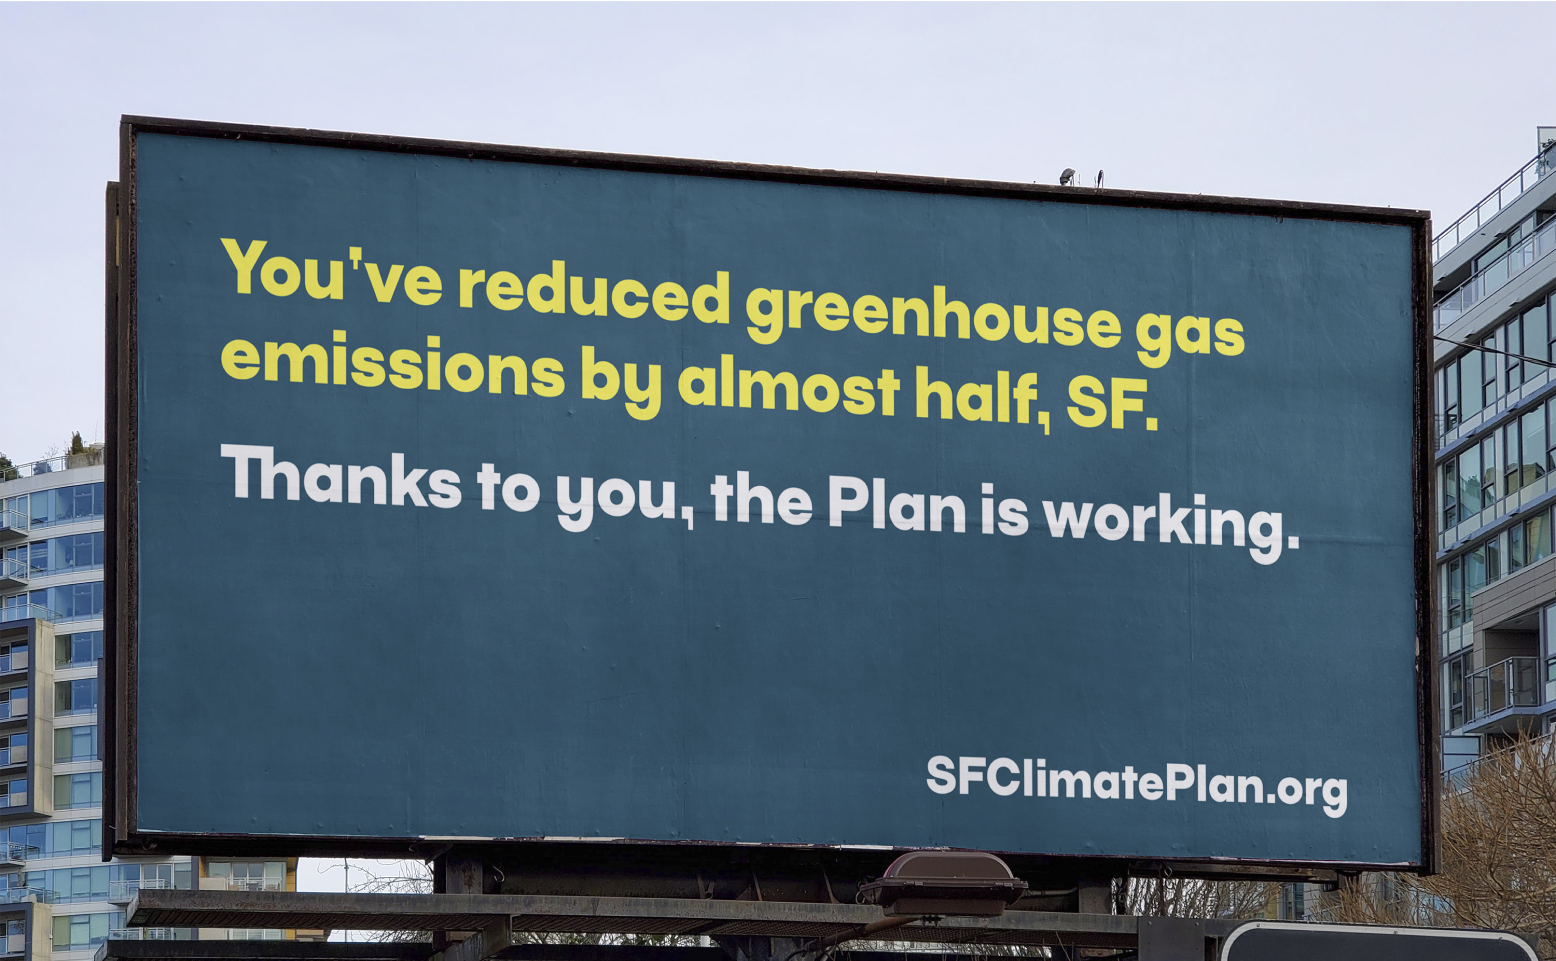 A billboard that says you've reduced greenhouse gas emissions by almost half.